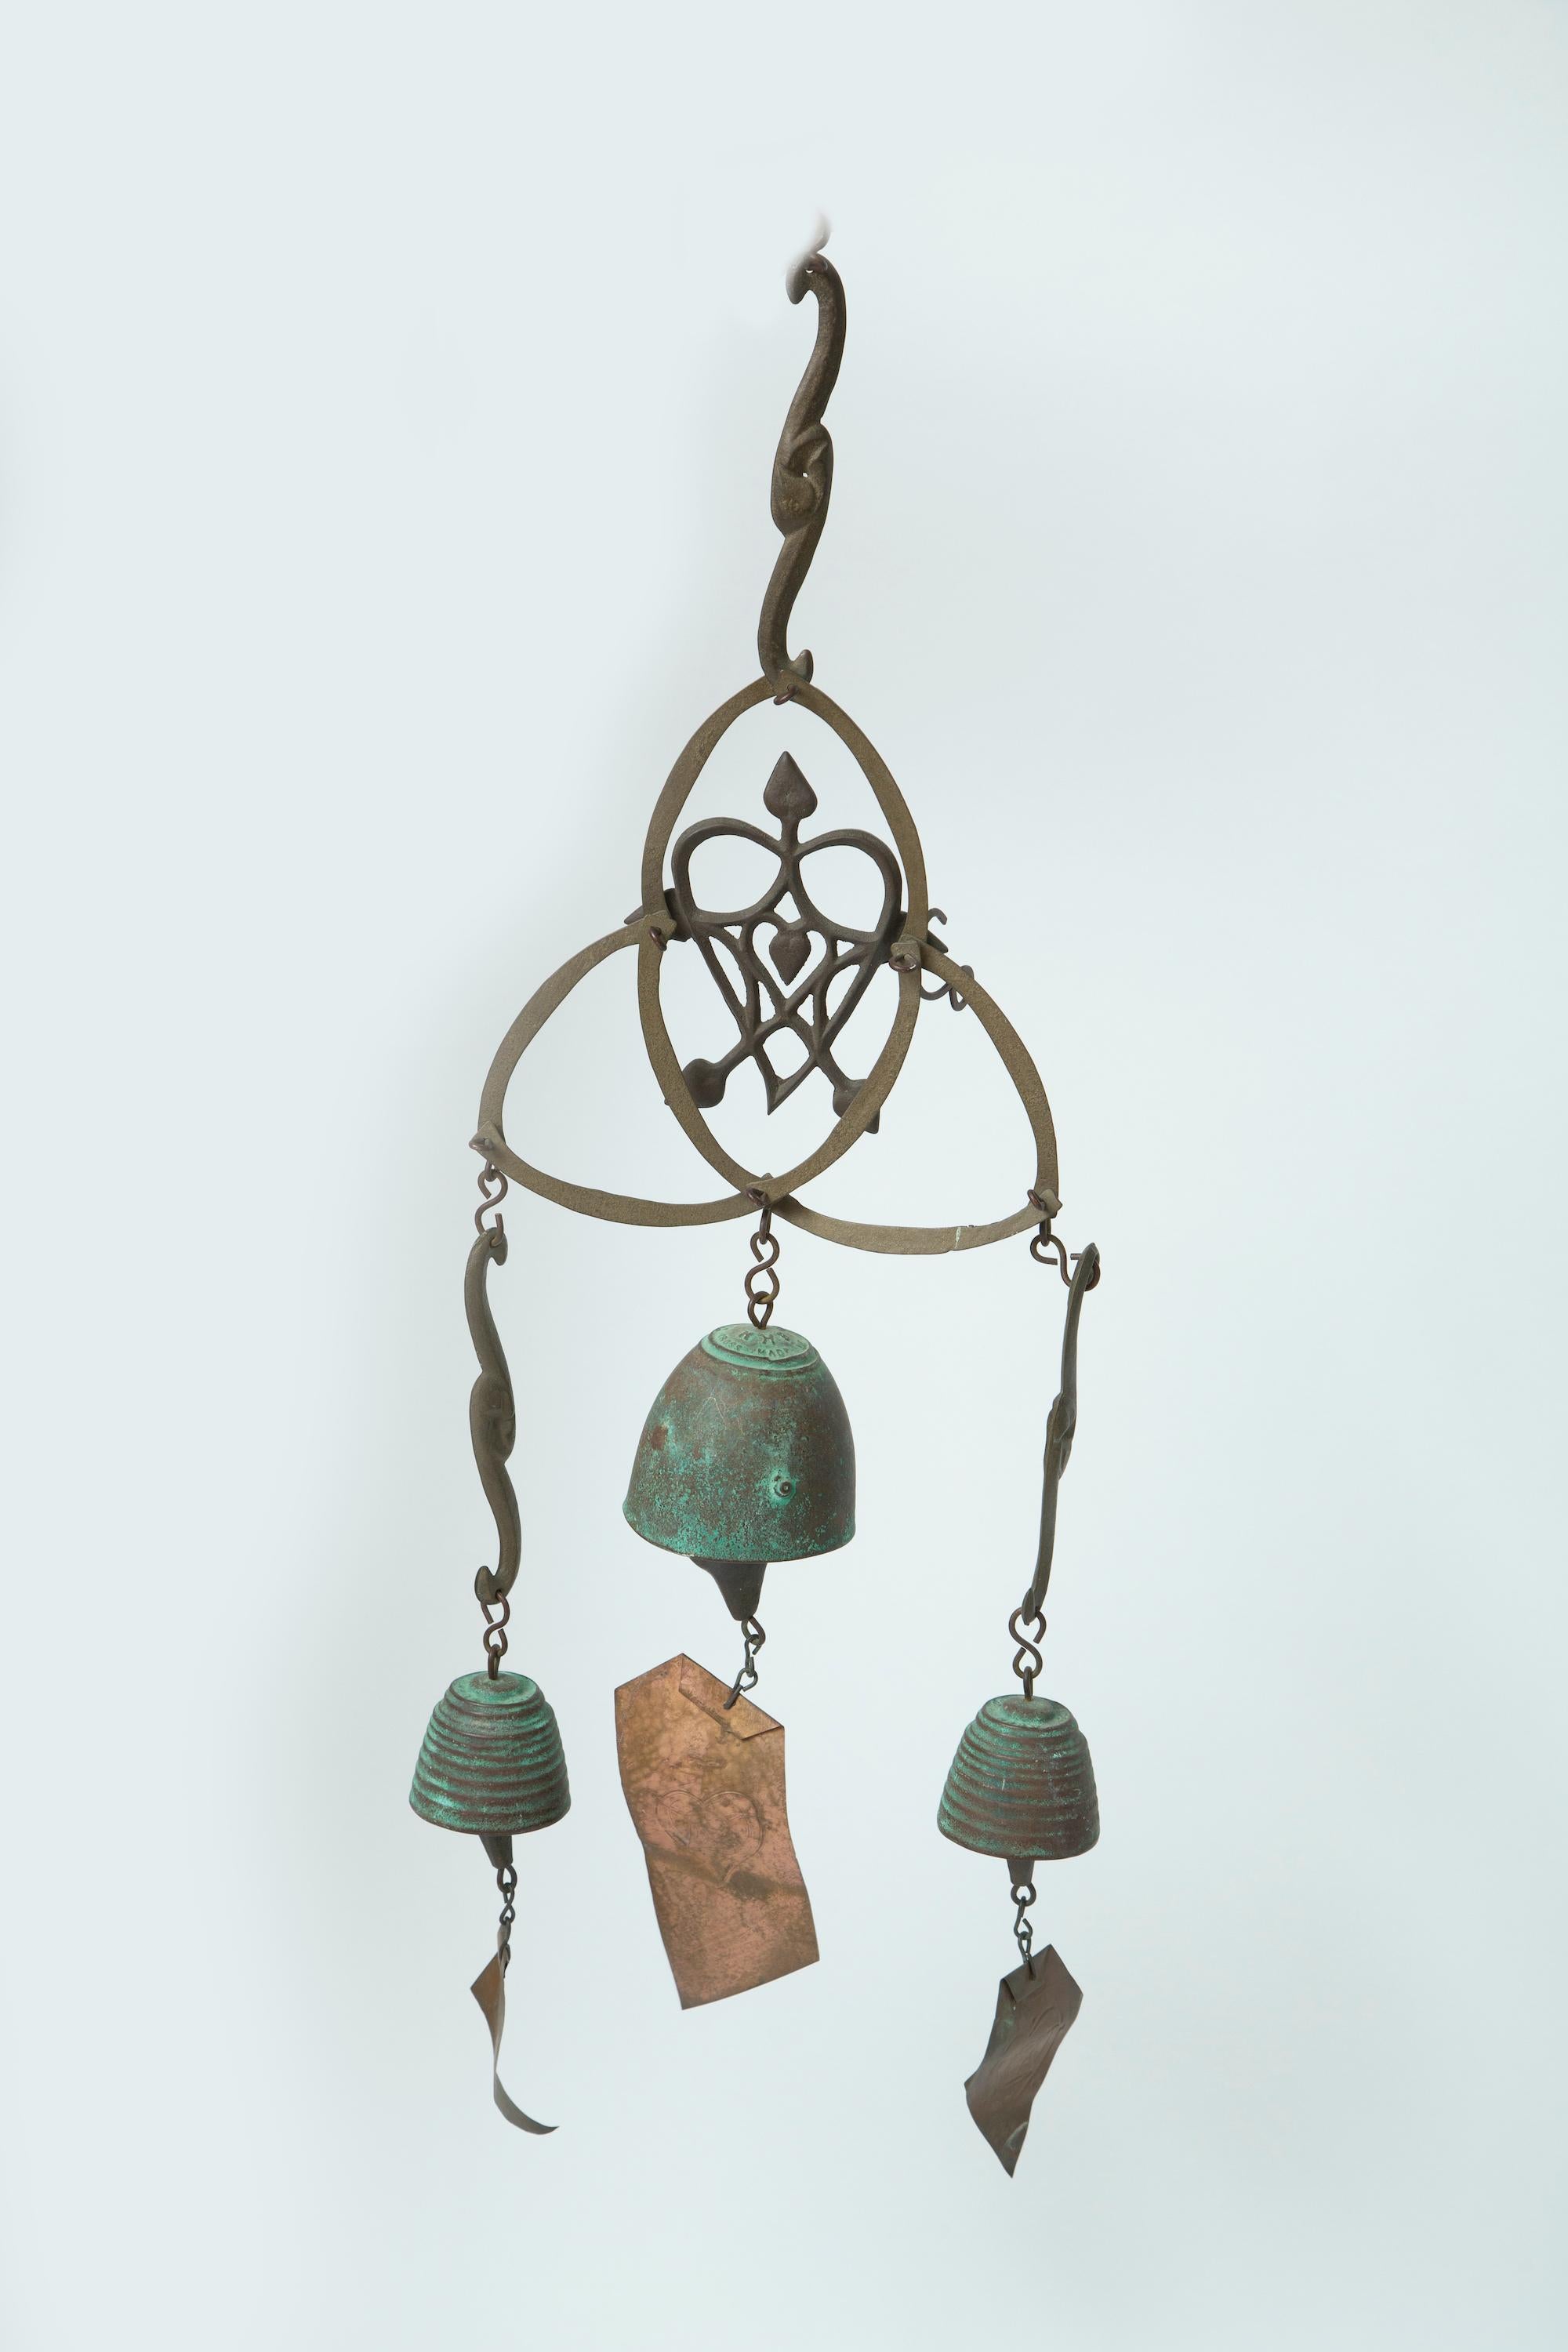 A hanging triple bell configuration.
An older example with great patina.